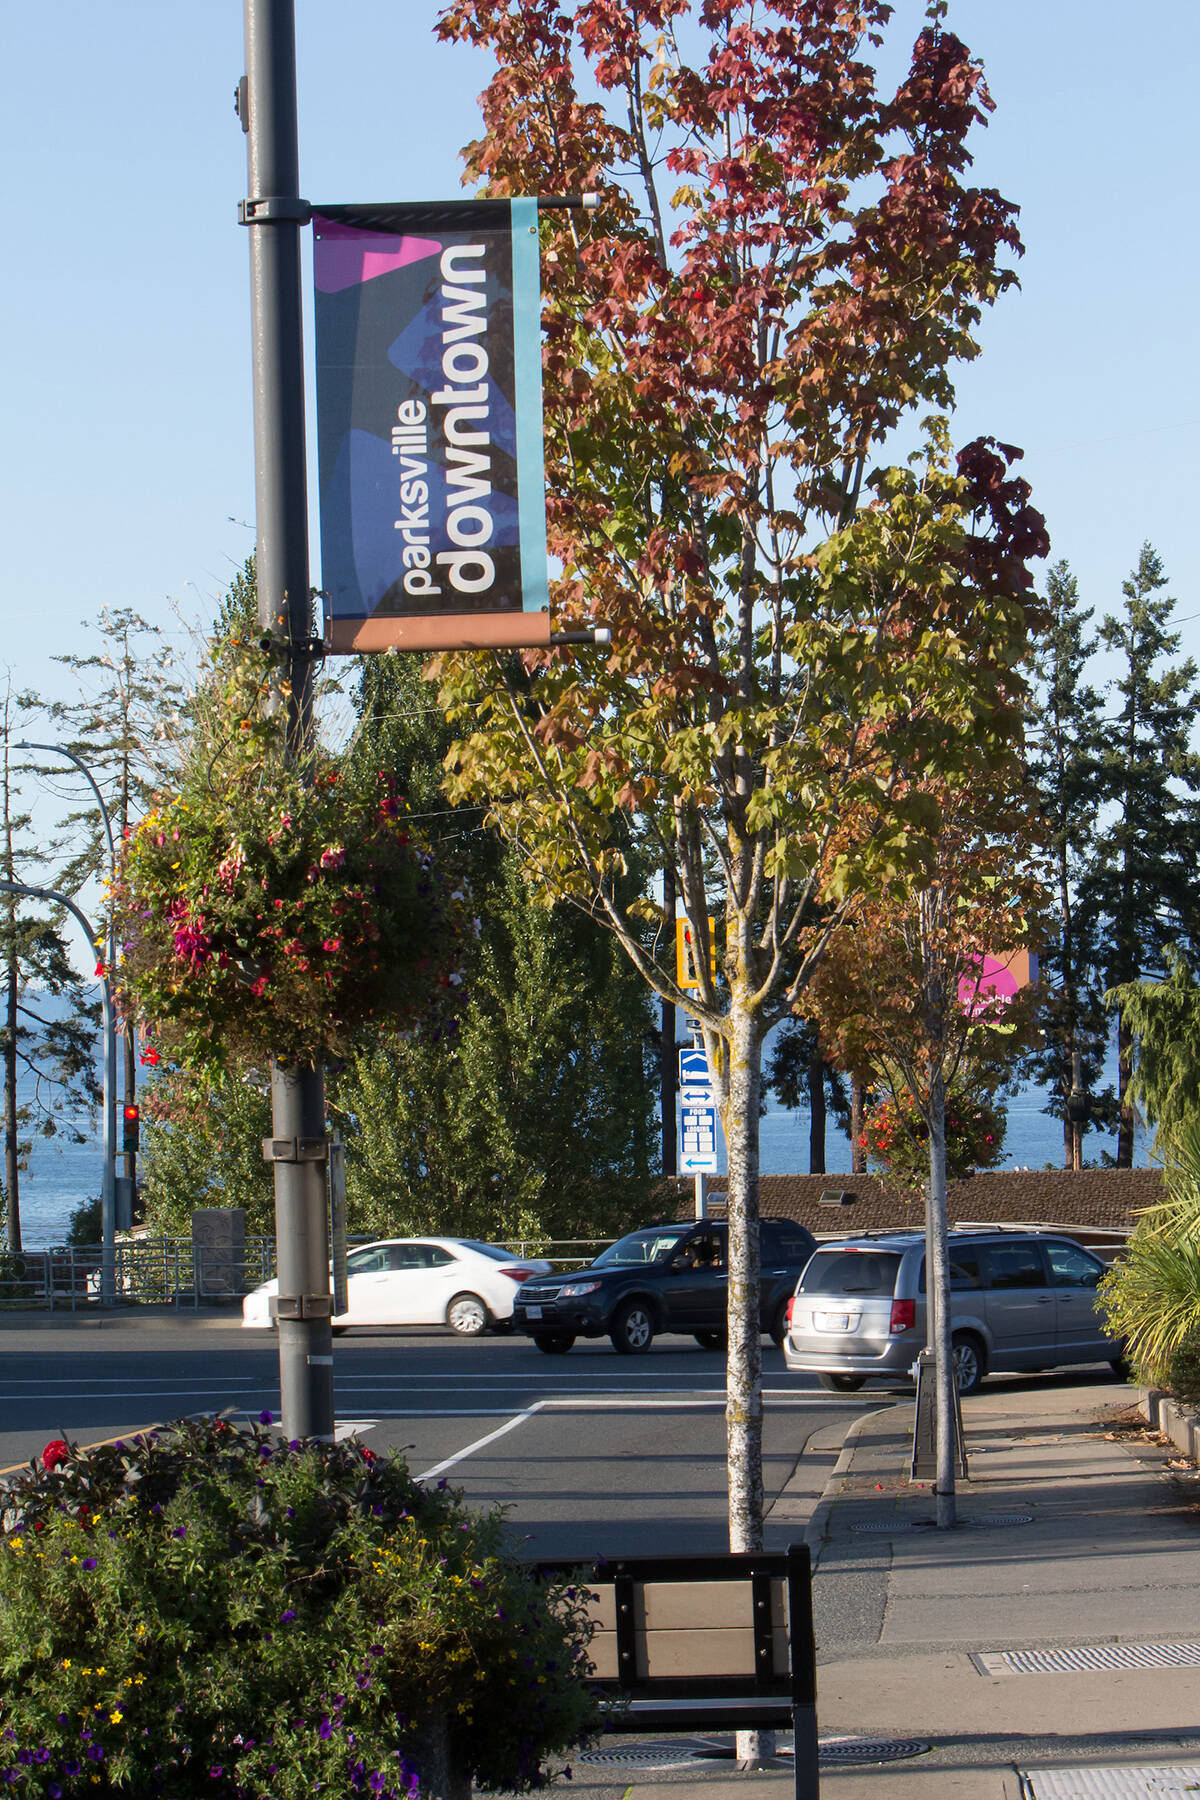 Explore an eclectic mix of shops, services, accommodations and dining experiences in downtown Parksville.